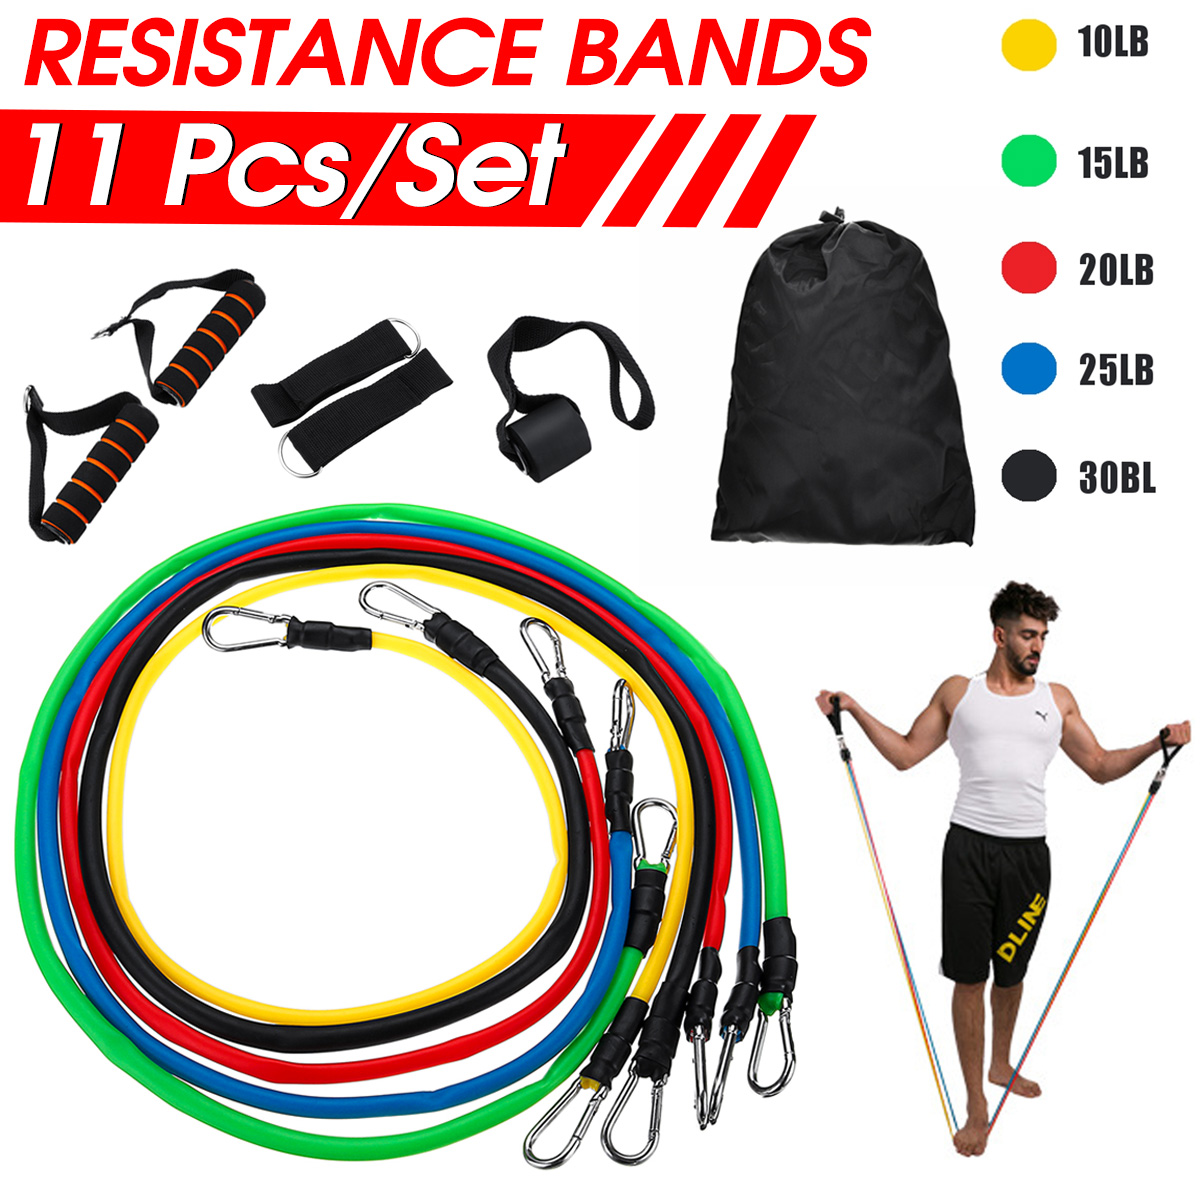 11-Pcs-Fitness-Resistance-Bands-with-Door-Anchor-Legs-Ankle-Straps-Carry-Bag-for-Resistance-Training-1883758-1